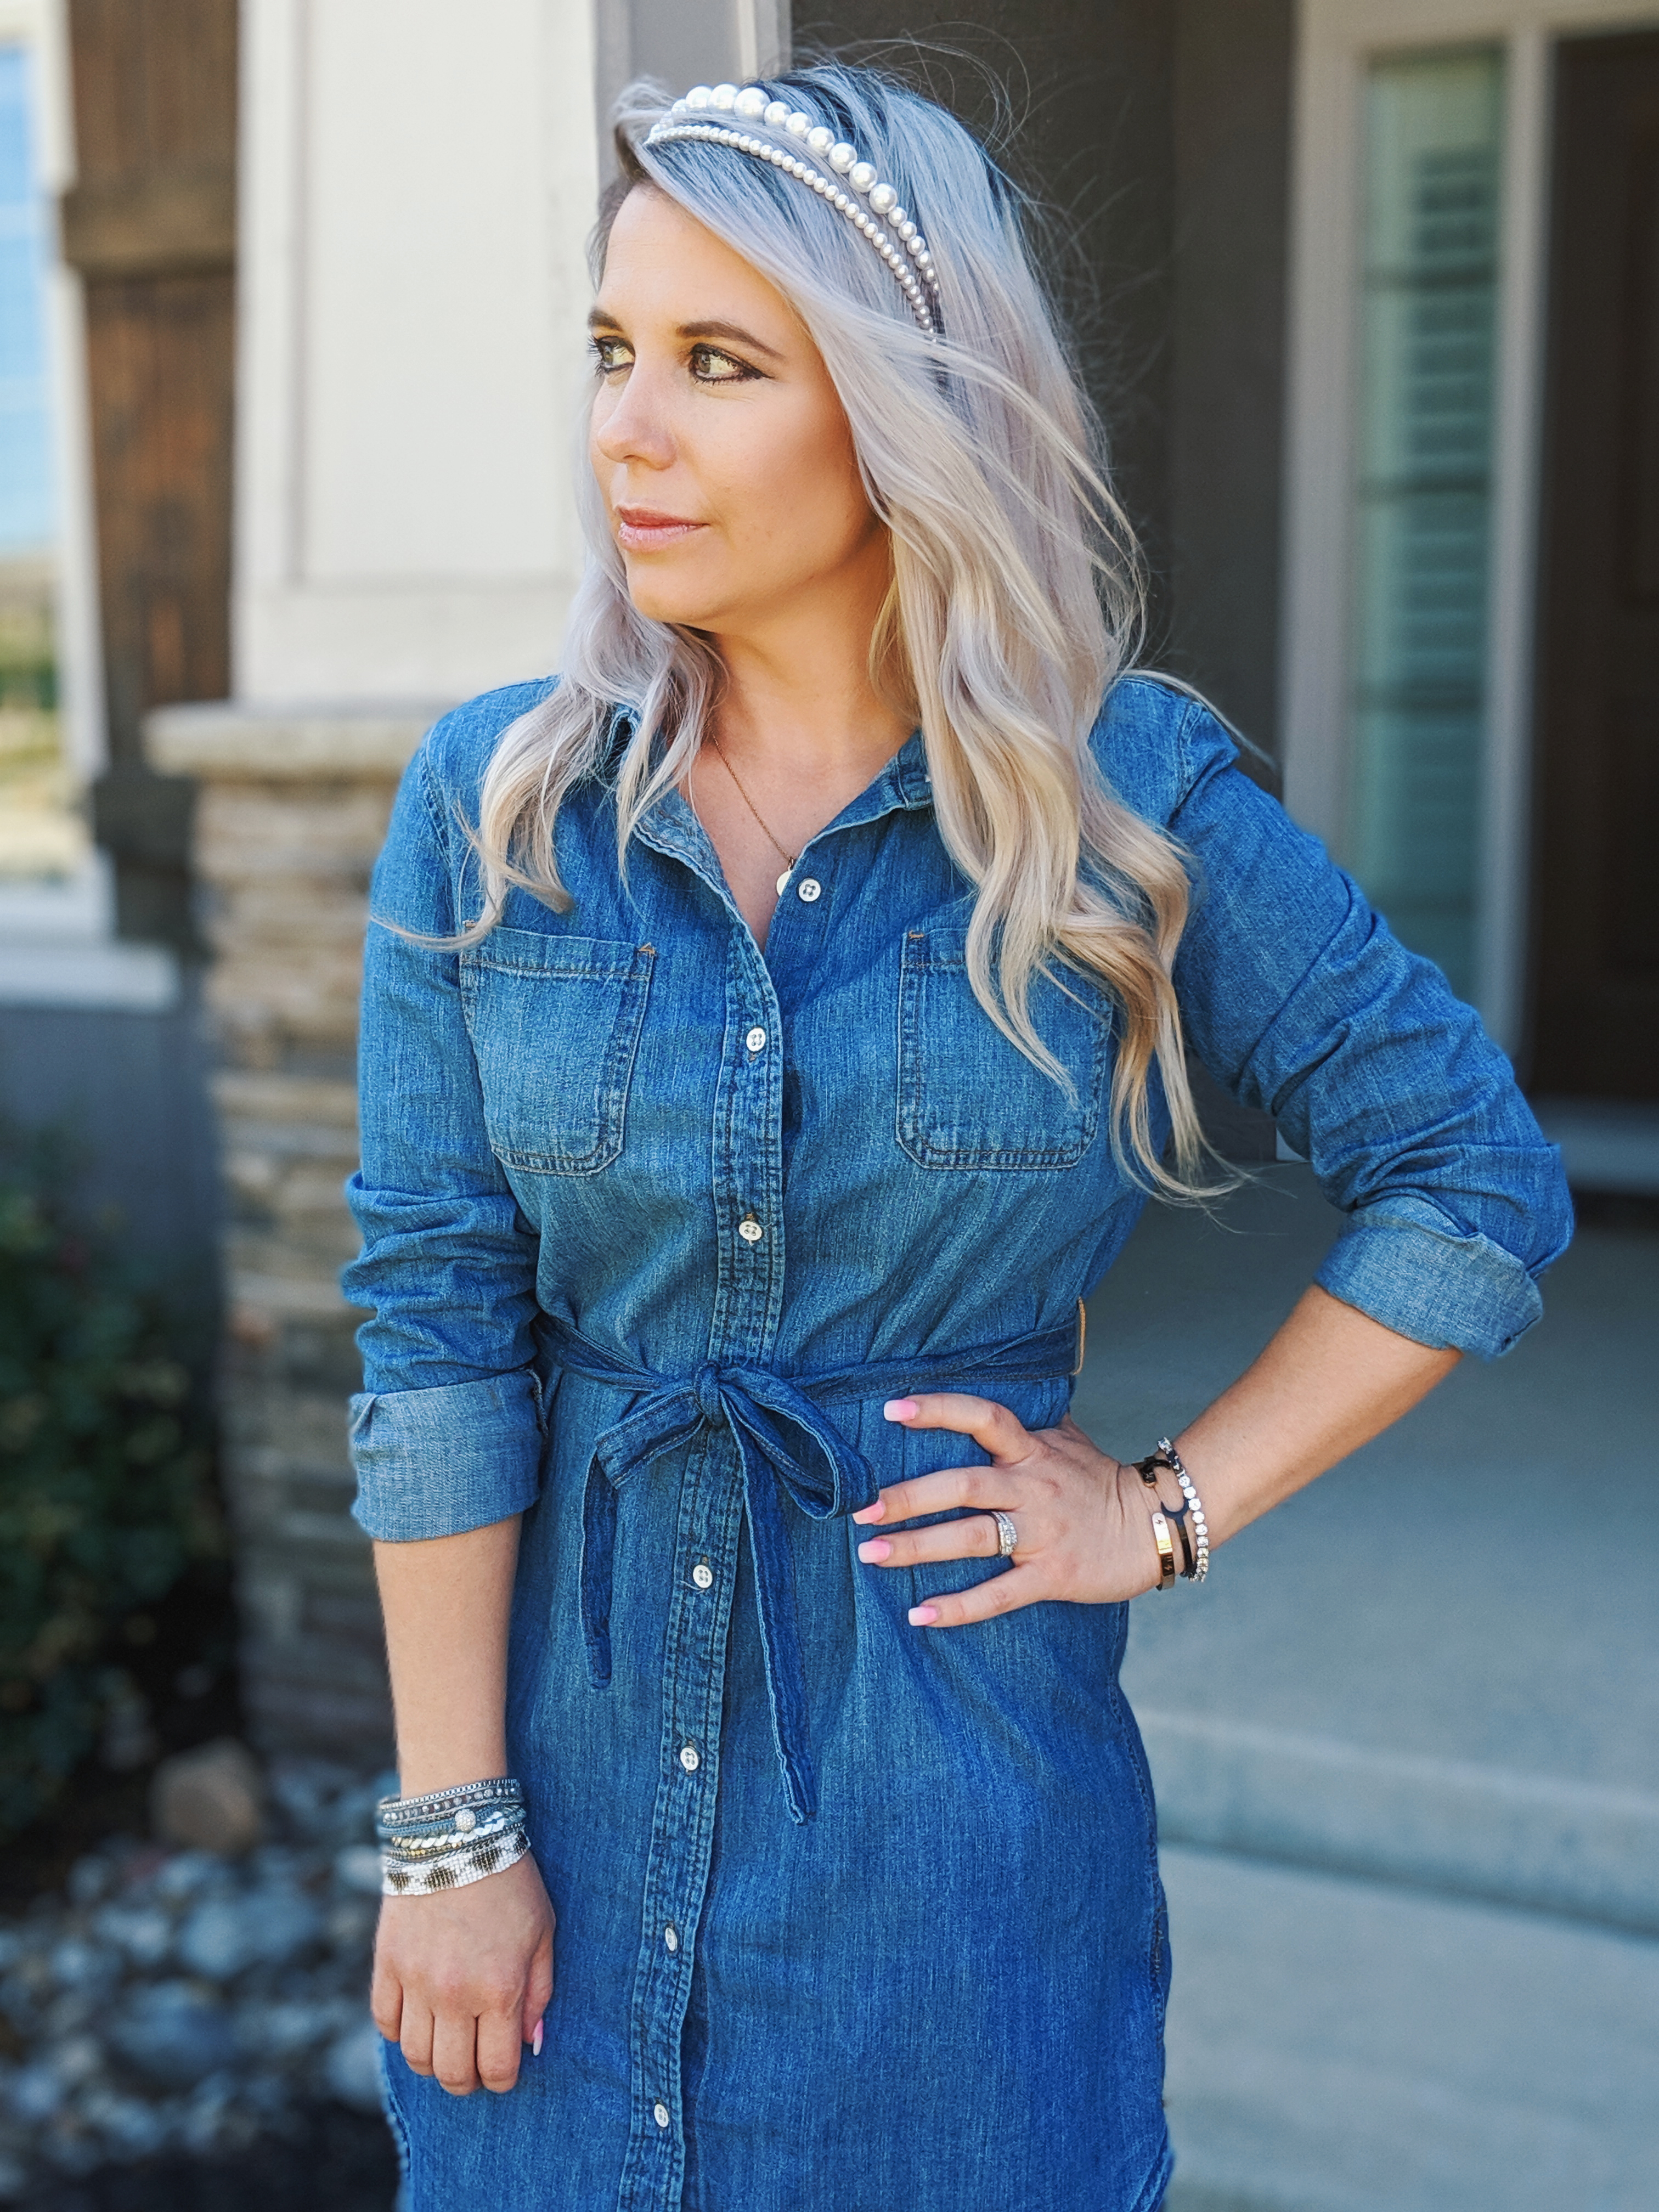 A DENIM DRESS AND SNEAKERS OUTFIT IDEA - STYLE INSPIRATION